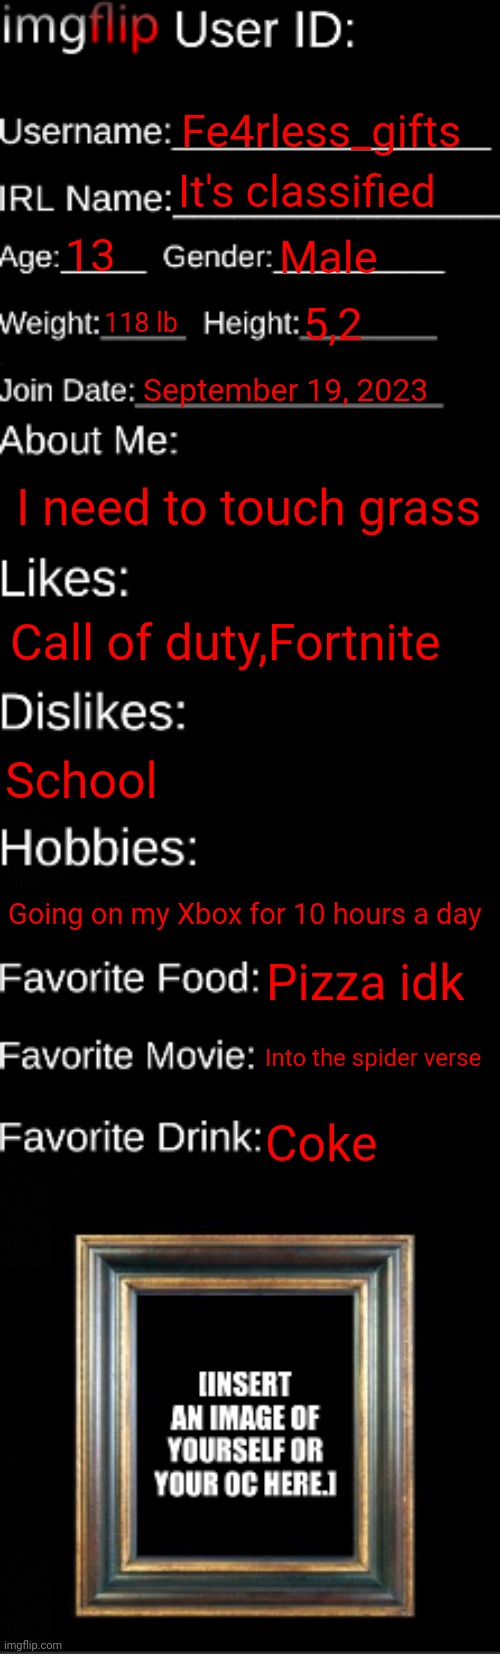 Shut up about the height | Fe4rless_gifts; It's classified; 13; Male; 118 lb; 5,2; September 19, 2023; I need to touch grass; Call of duty,Fortnite; School; Going on my Xbox for 10 hours a day; Pizza idk; Into the spider verse; Coke | image tagged in imgflip id card | made w/ Imgflip meme maker